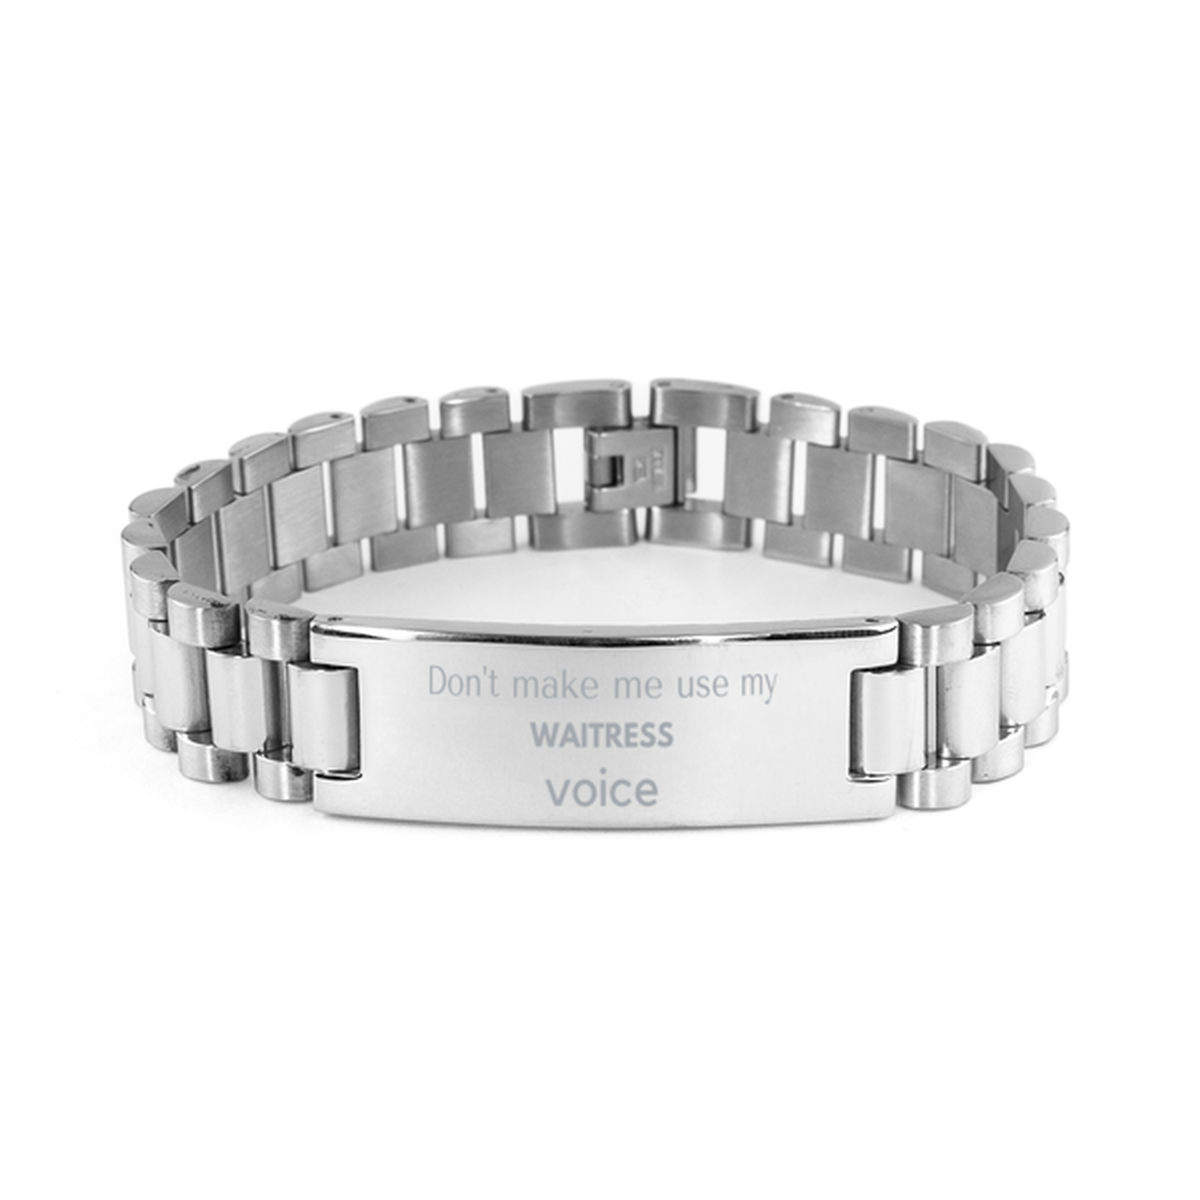 Don't make me use my Waitress voice, Sarcasm Waitress Gifts, Christmas Waitress Ladder Stainless Steel Bracelet Birthday Unique Gifts For Waitress Coworkers, Men, Women, Colleague, Friends